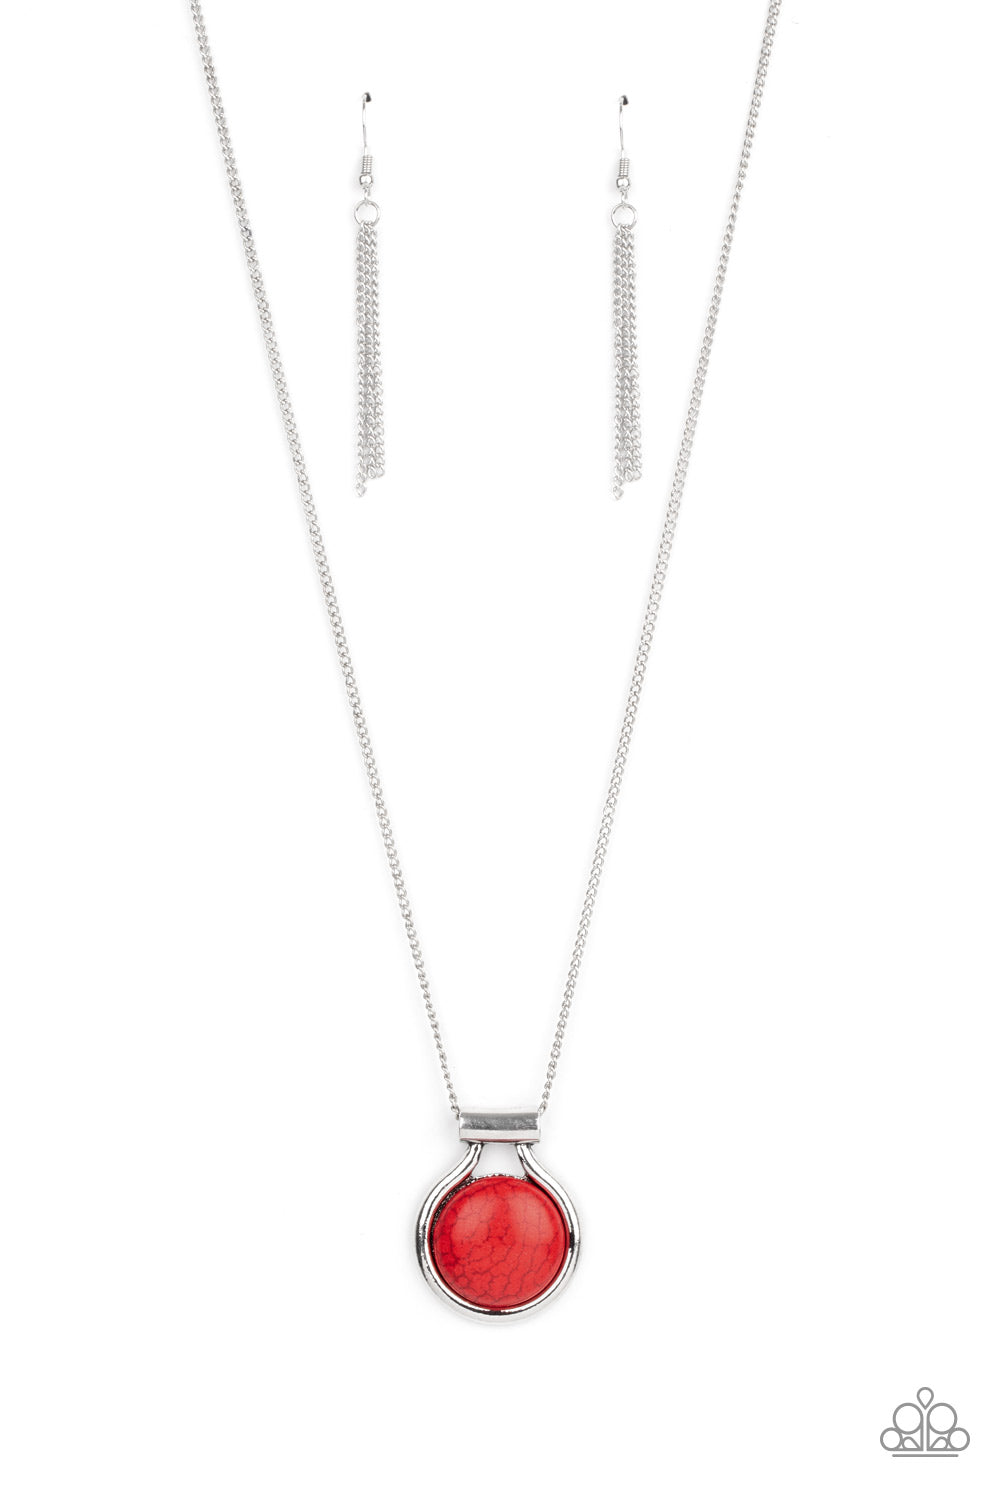 Patagonian Paradise - Red Necklace - Paparazzi Accessories